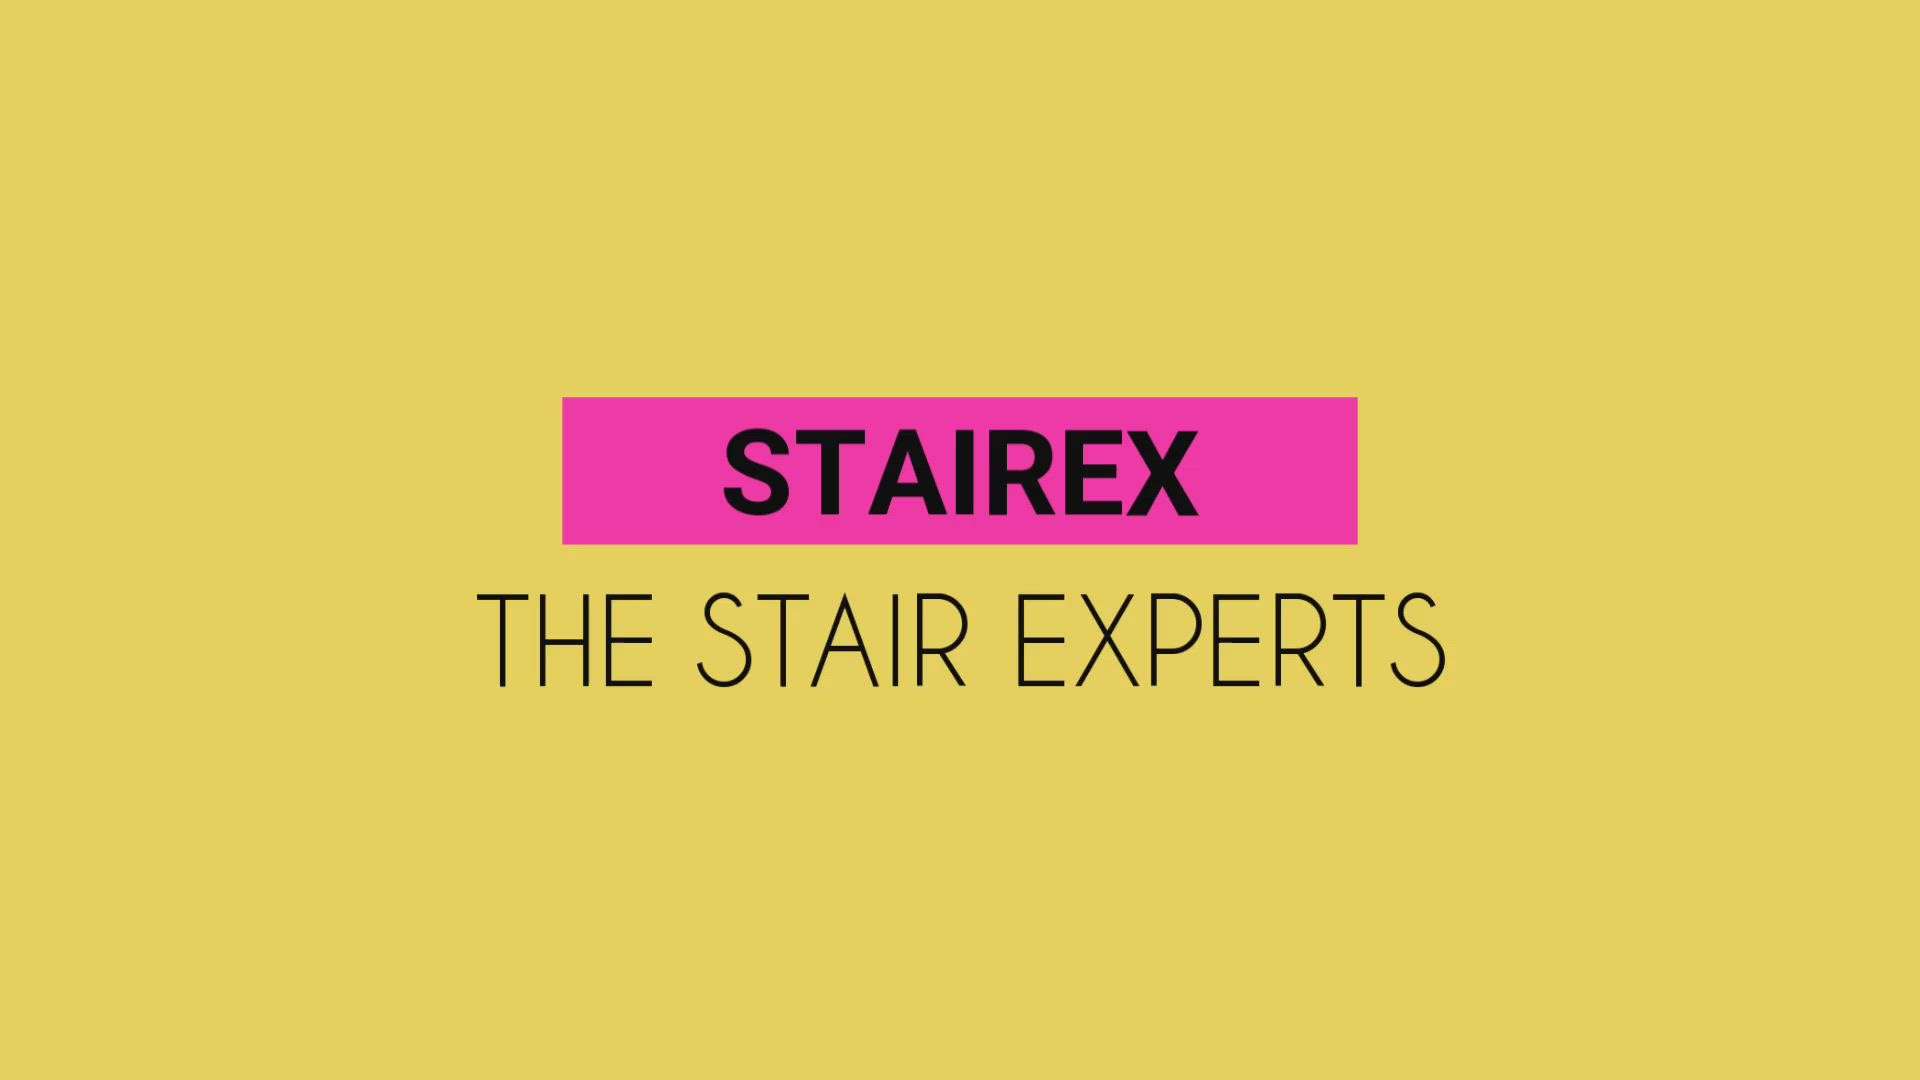 Stairex
The Stair Experts 



 #metalstaircase #StaircaseDesigns  #stairs  #stairsdesign